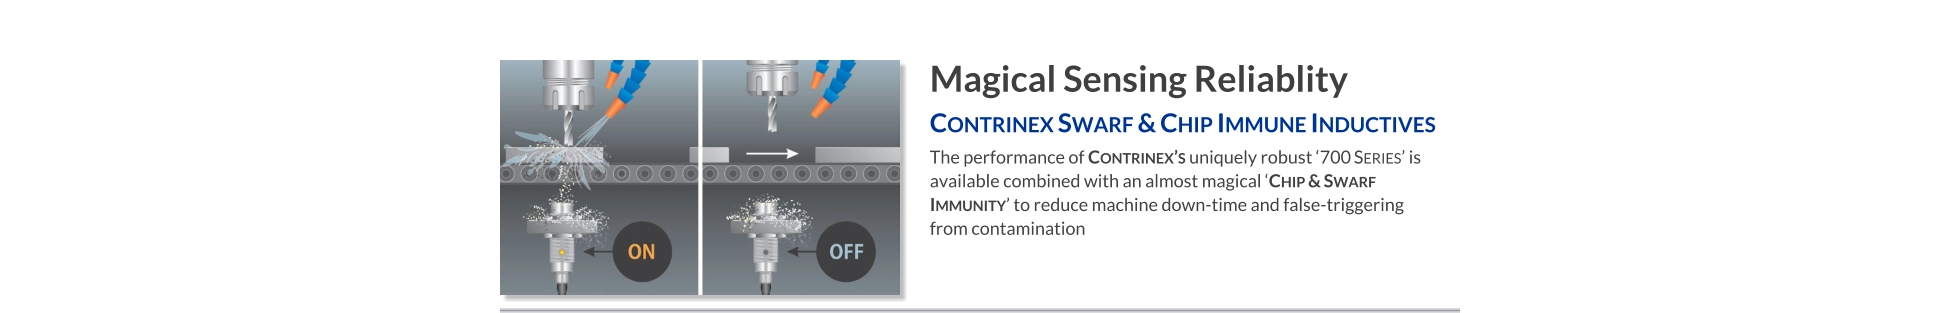 Magical Sensing Reliablity Contrinex Swarf & Chip Immune Inductives   The performance of Contrinex’s uniquely robust ‘700 Series’ is available combined with an almost magical ‘Chip & Swarf Immunity’ to REDUCE MACHINE DOWN-TIME and false-triggering from contamination